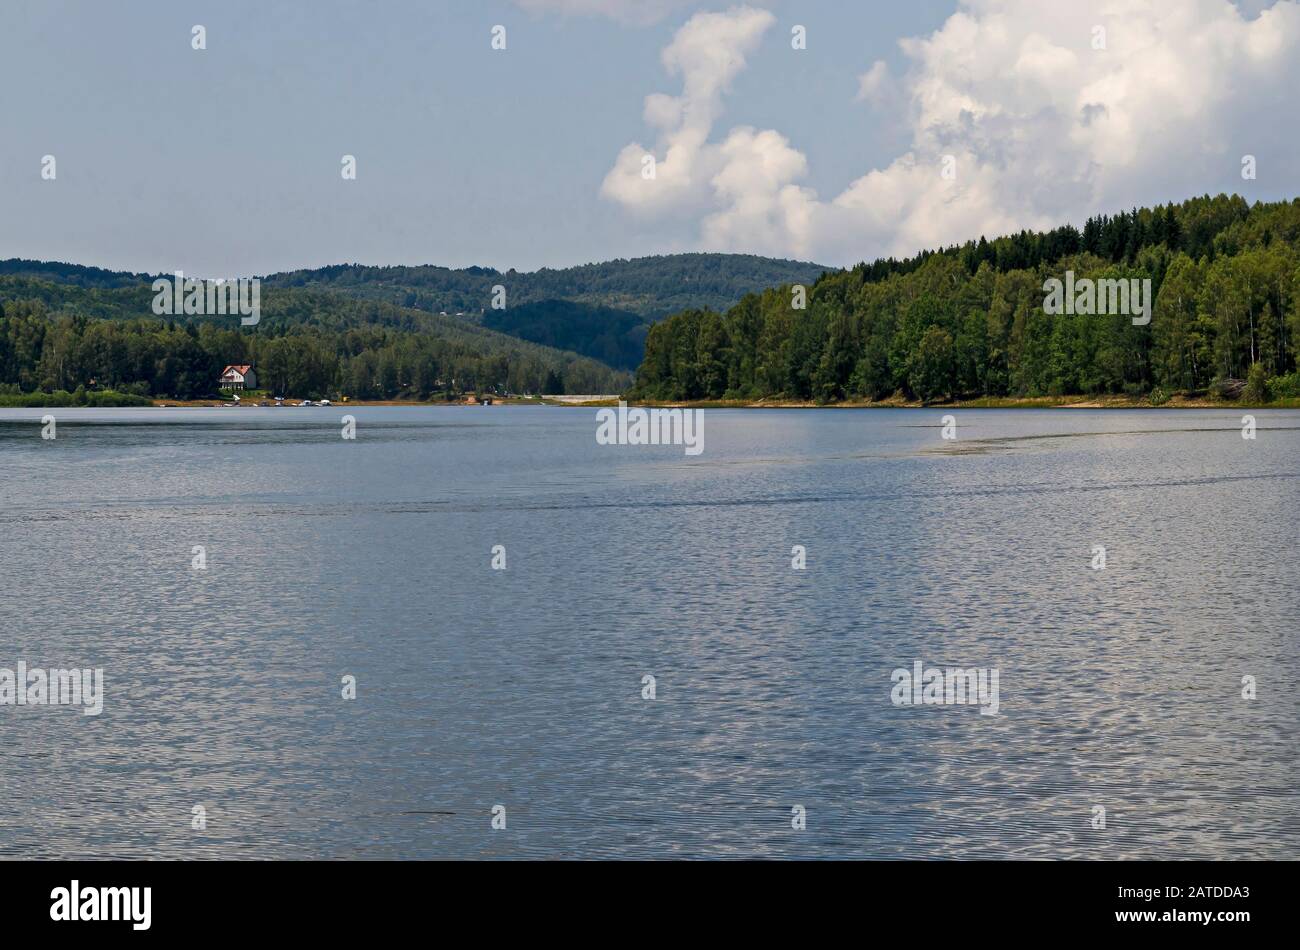 View of the wall built on the Vlasina river, where the artificial Vlasina mountain lake is formed, South eastern Serbia, Europe Stock Photo